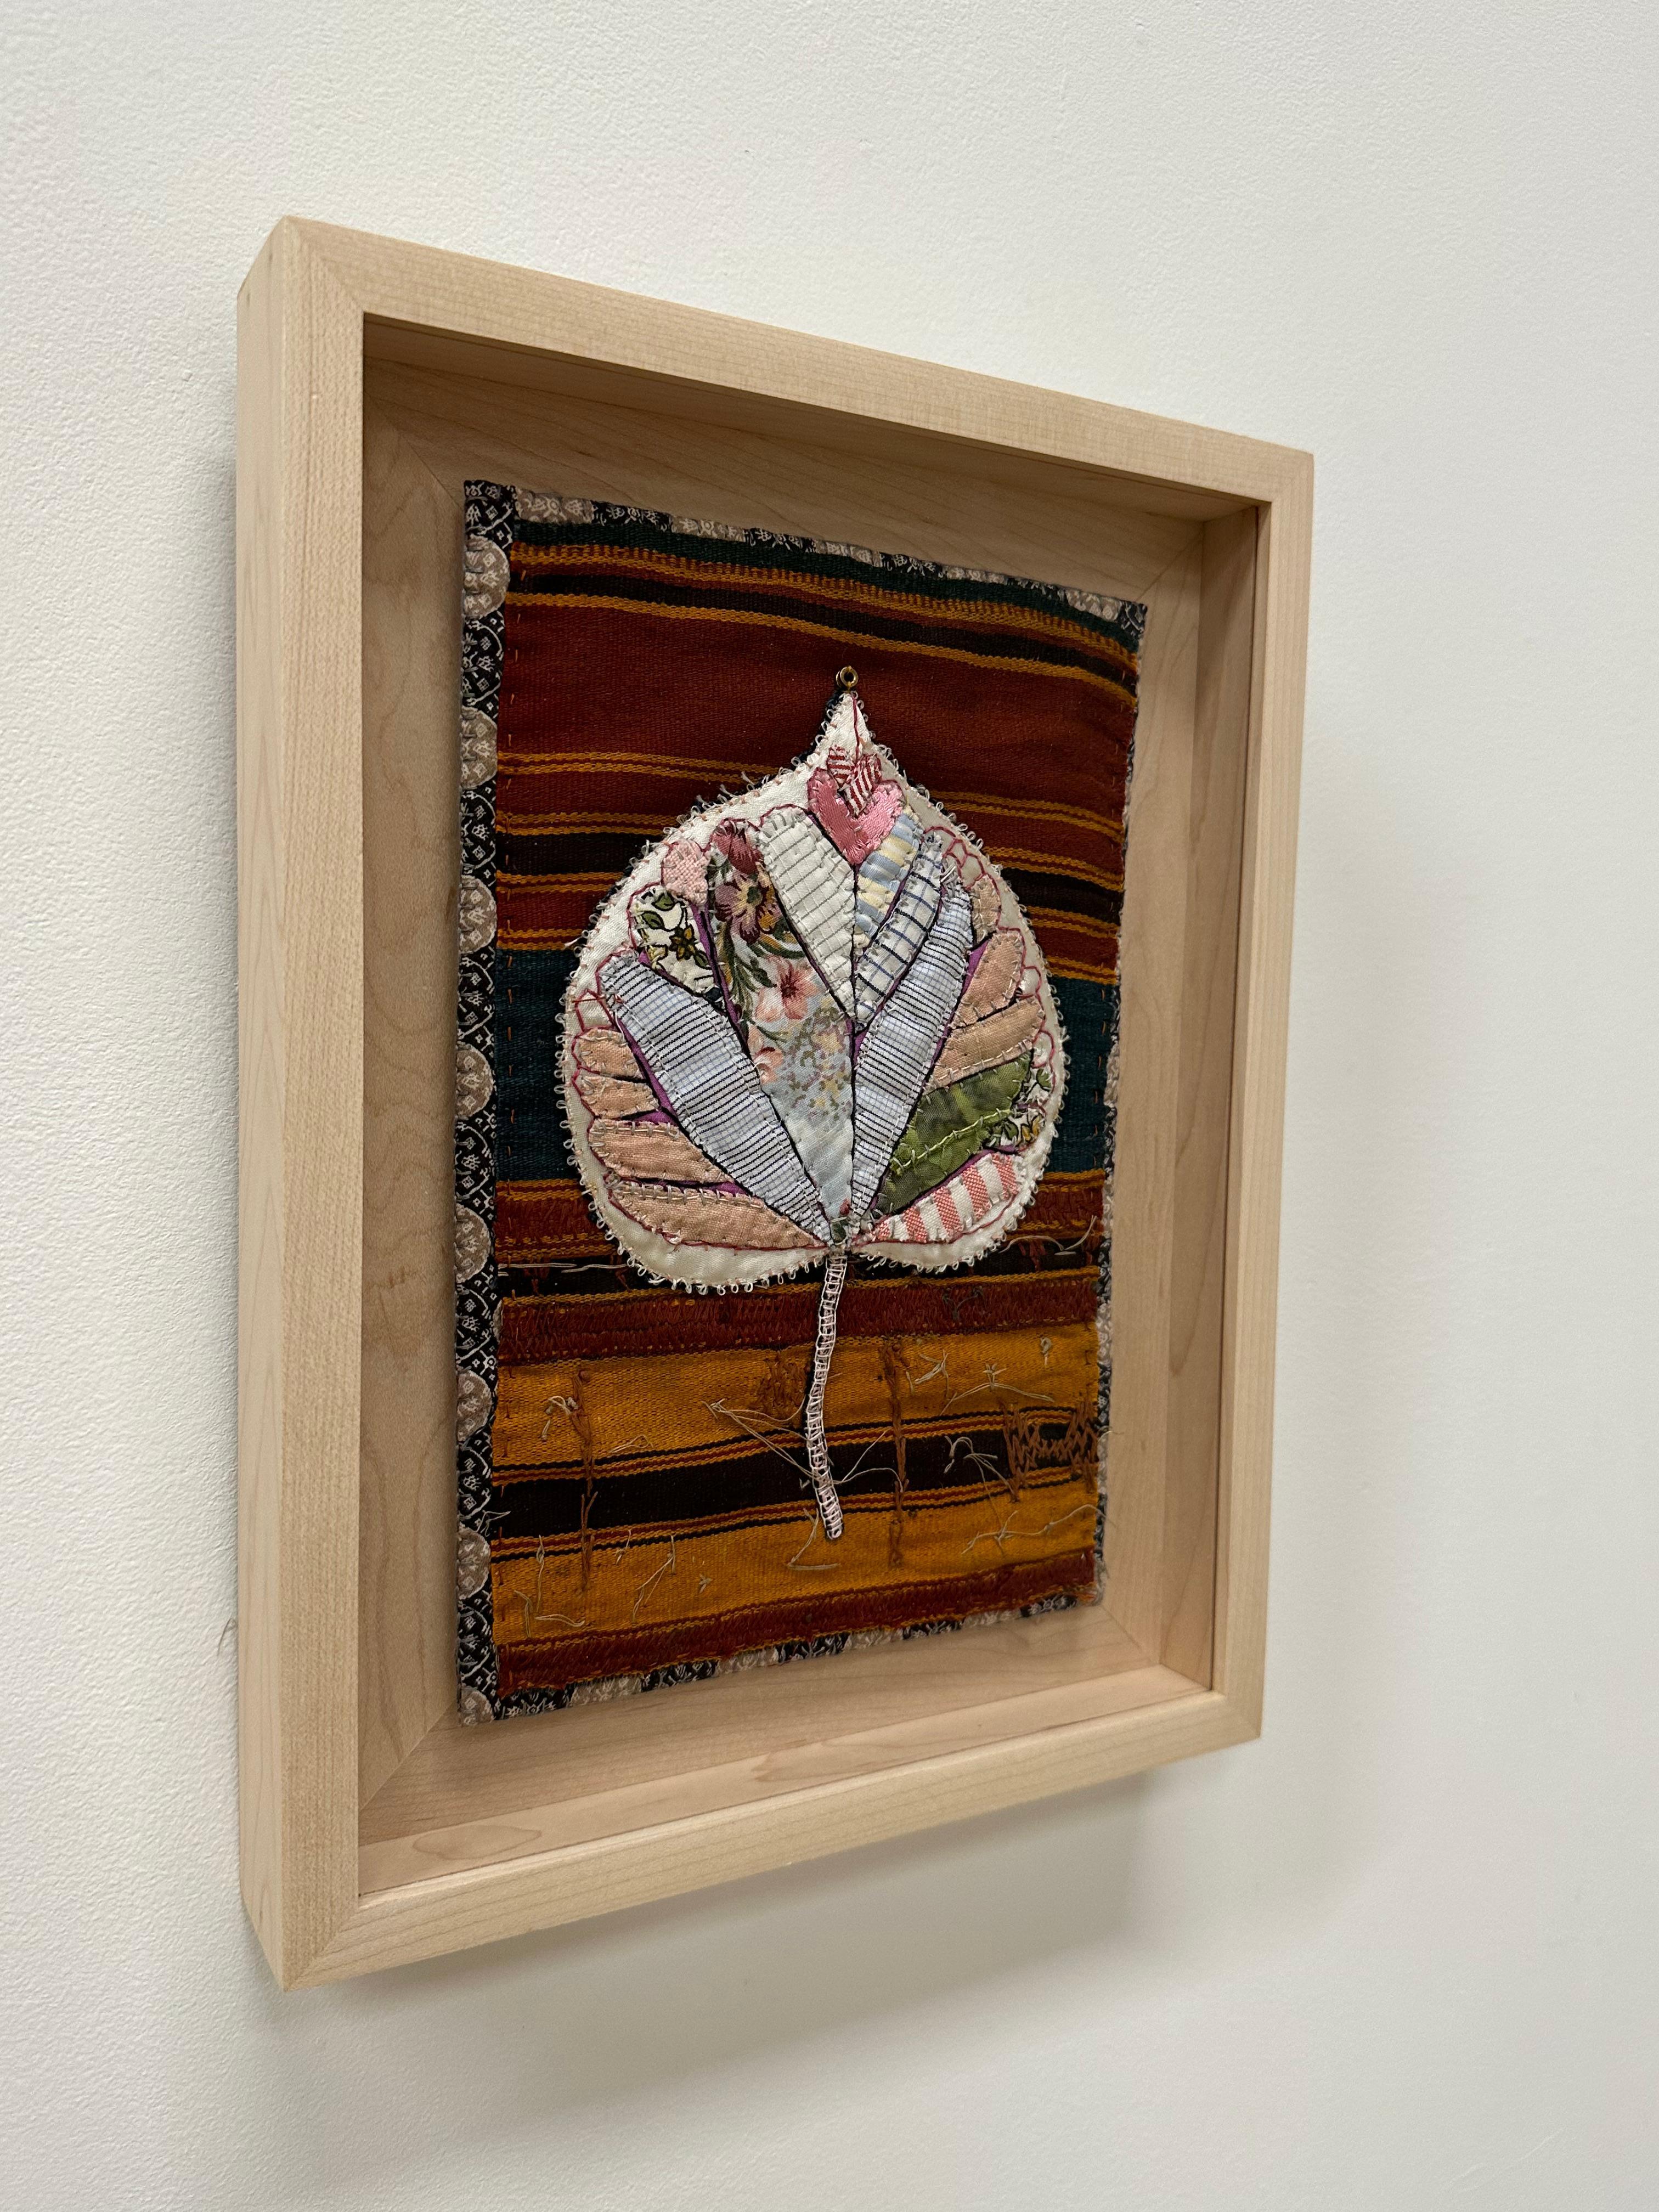 An eastern redbud leaf is composed of delicately stitched donated clothing, textiles, notions, buttons and guitar string ball-ends, in warm umber brown, saffron, light pink, sage green and a botanical pattern. 

Floated on a natural maple wood